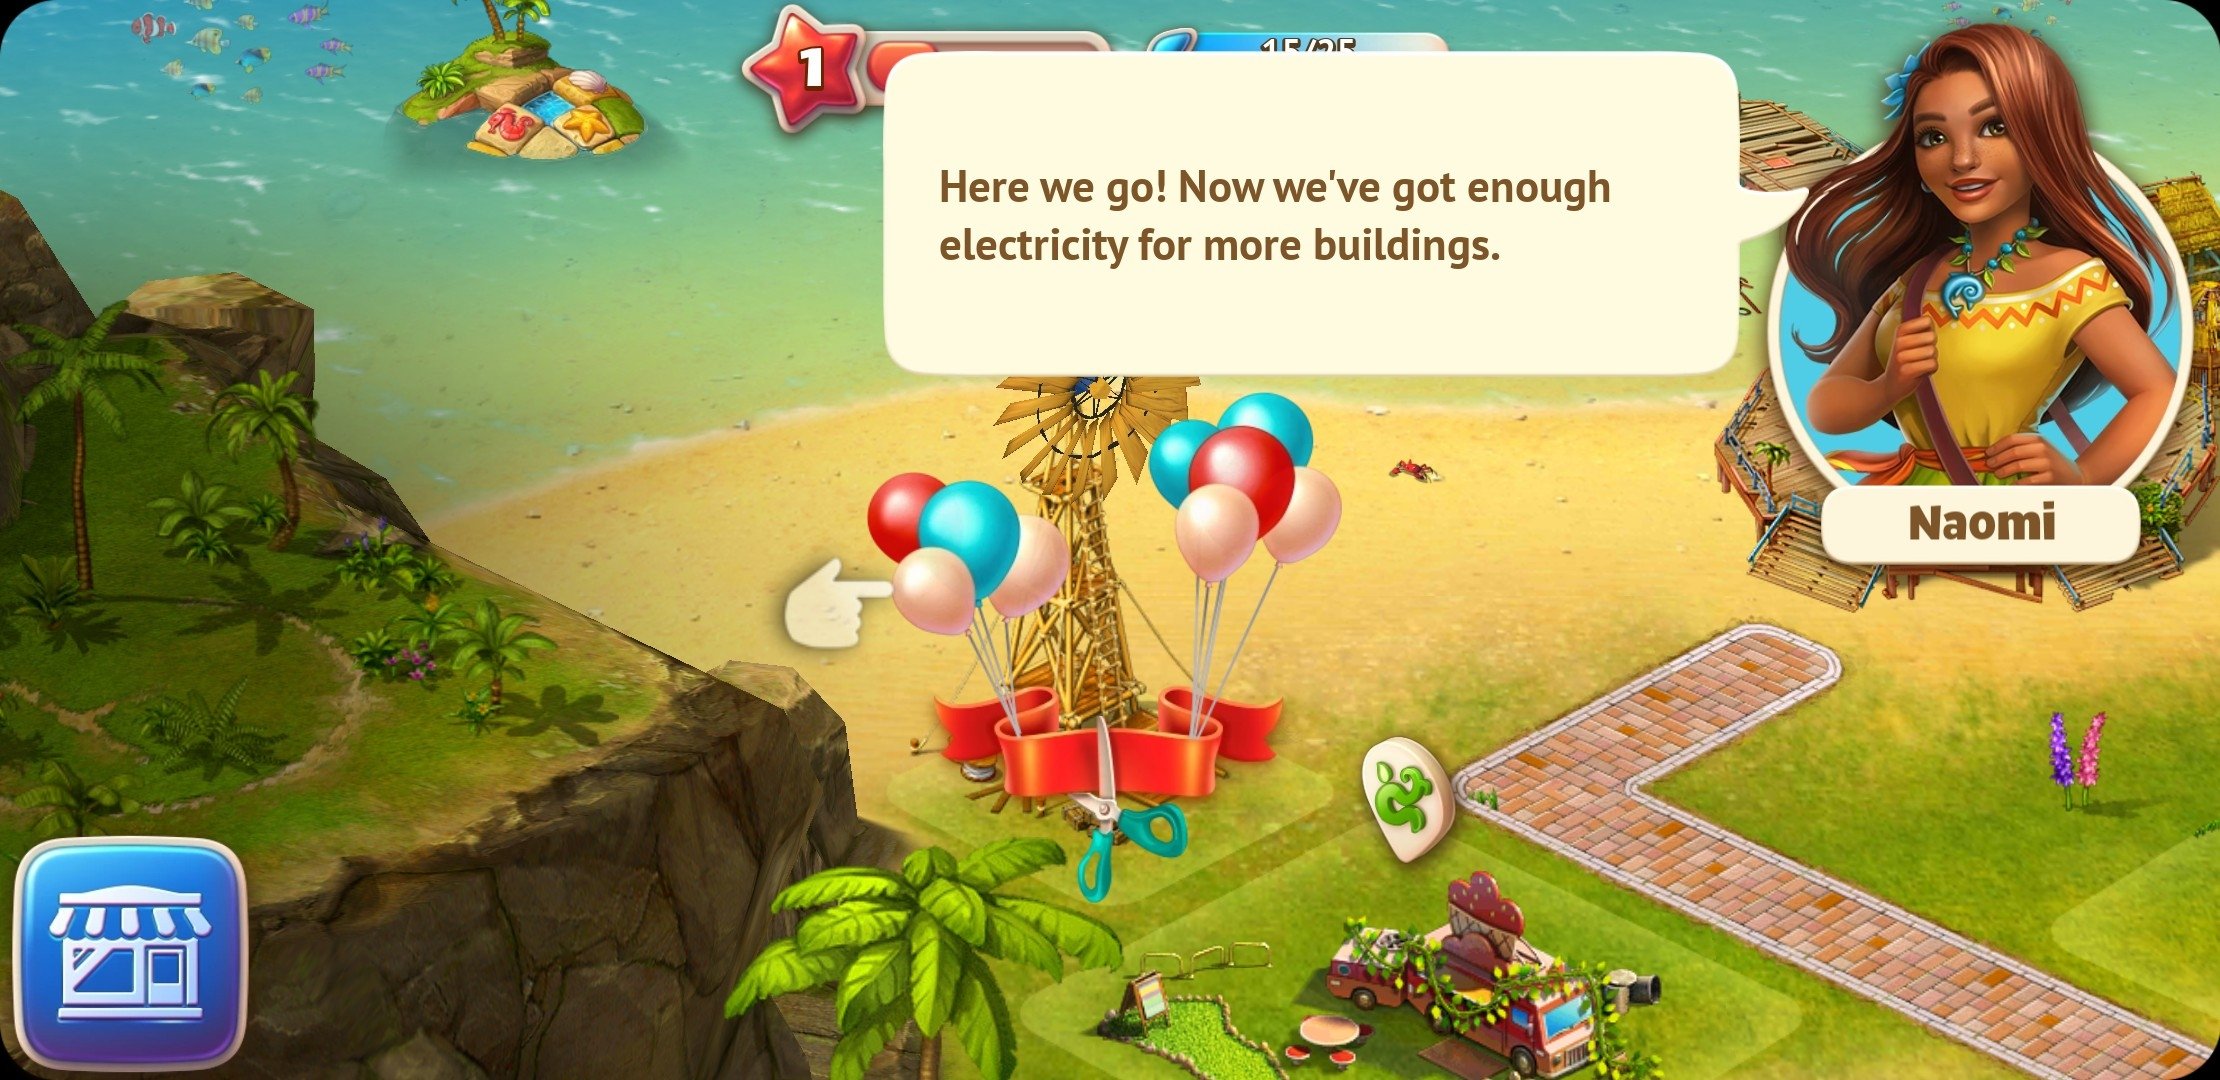 how to delete game play in paradise island 2 mobile